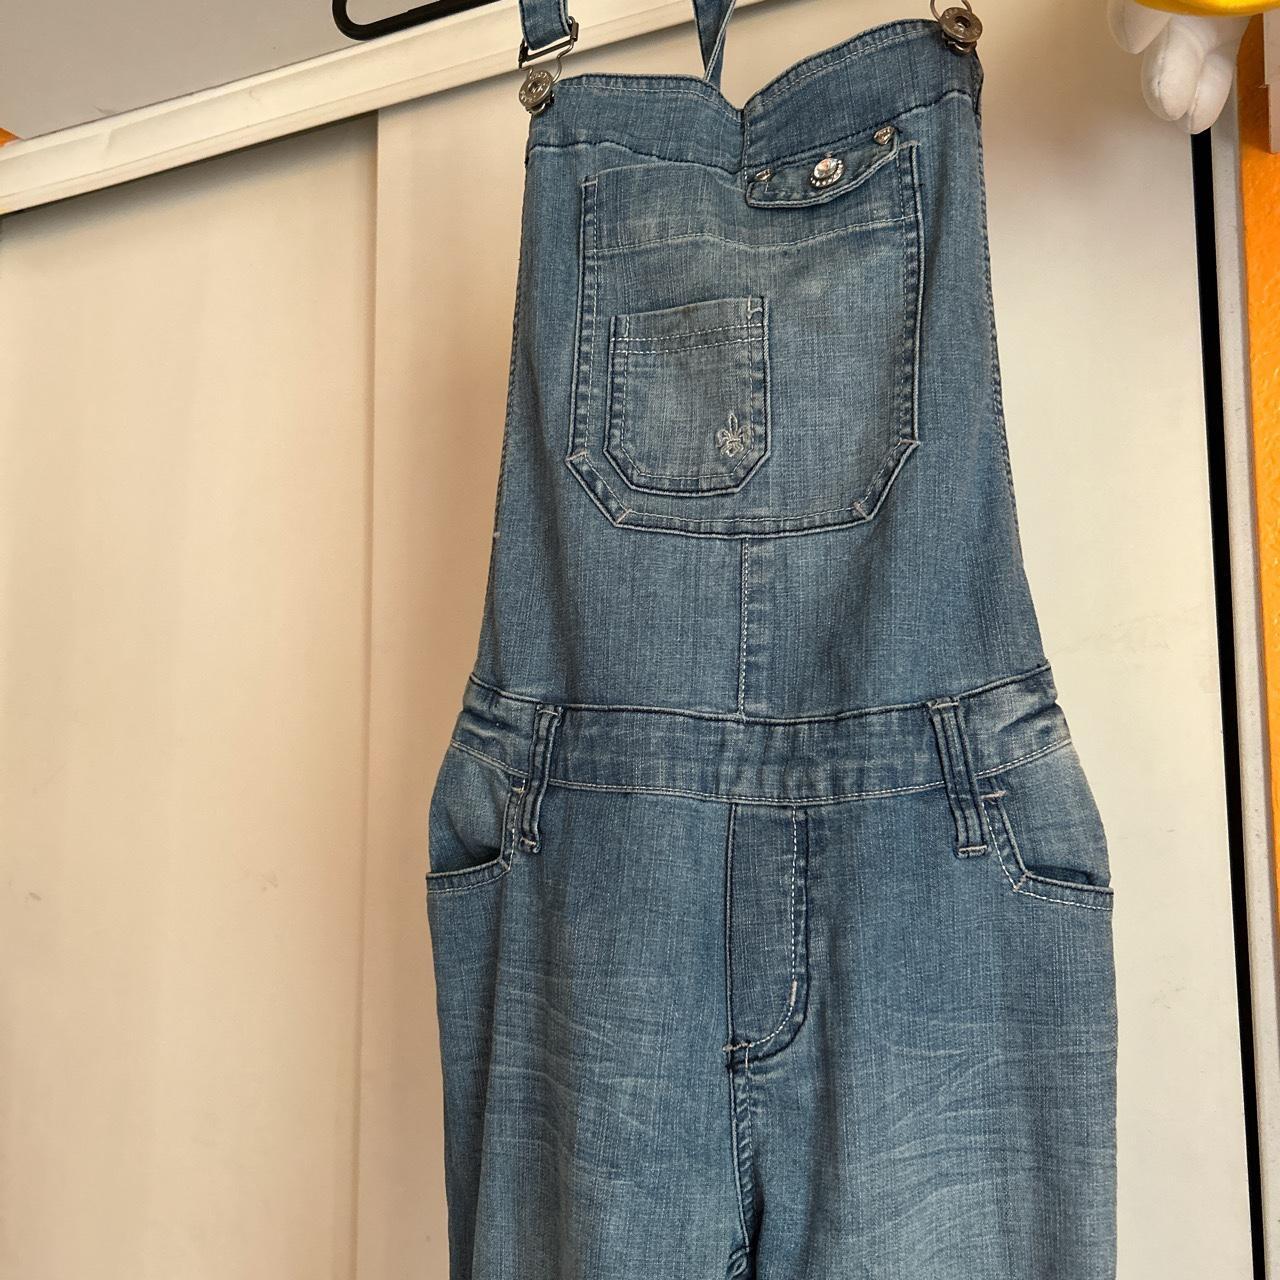 PLEASE READ BEFORE PURCHASING: rlly cute overalls... - Depop